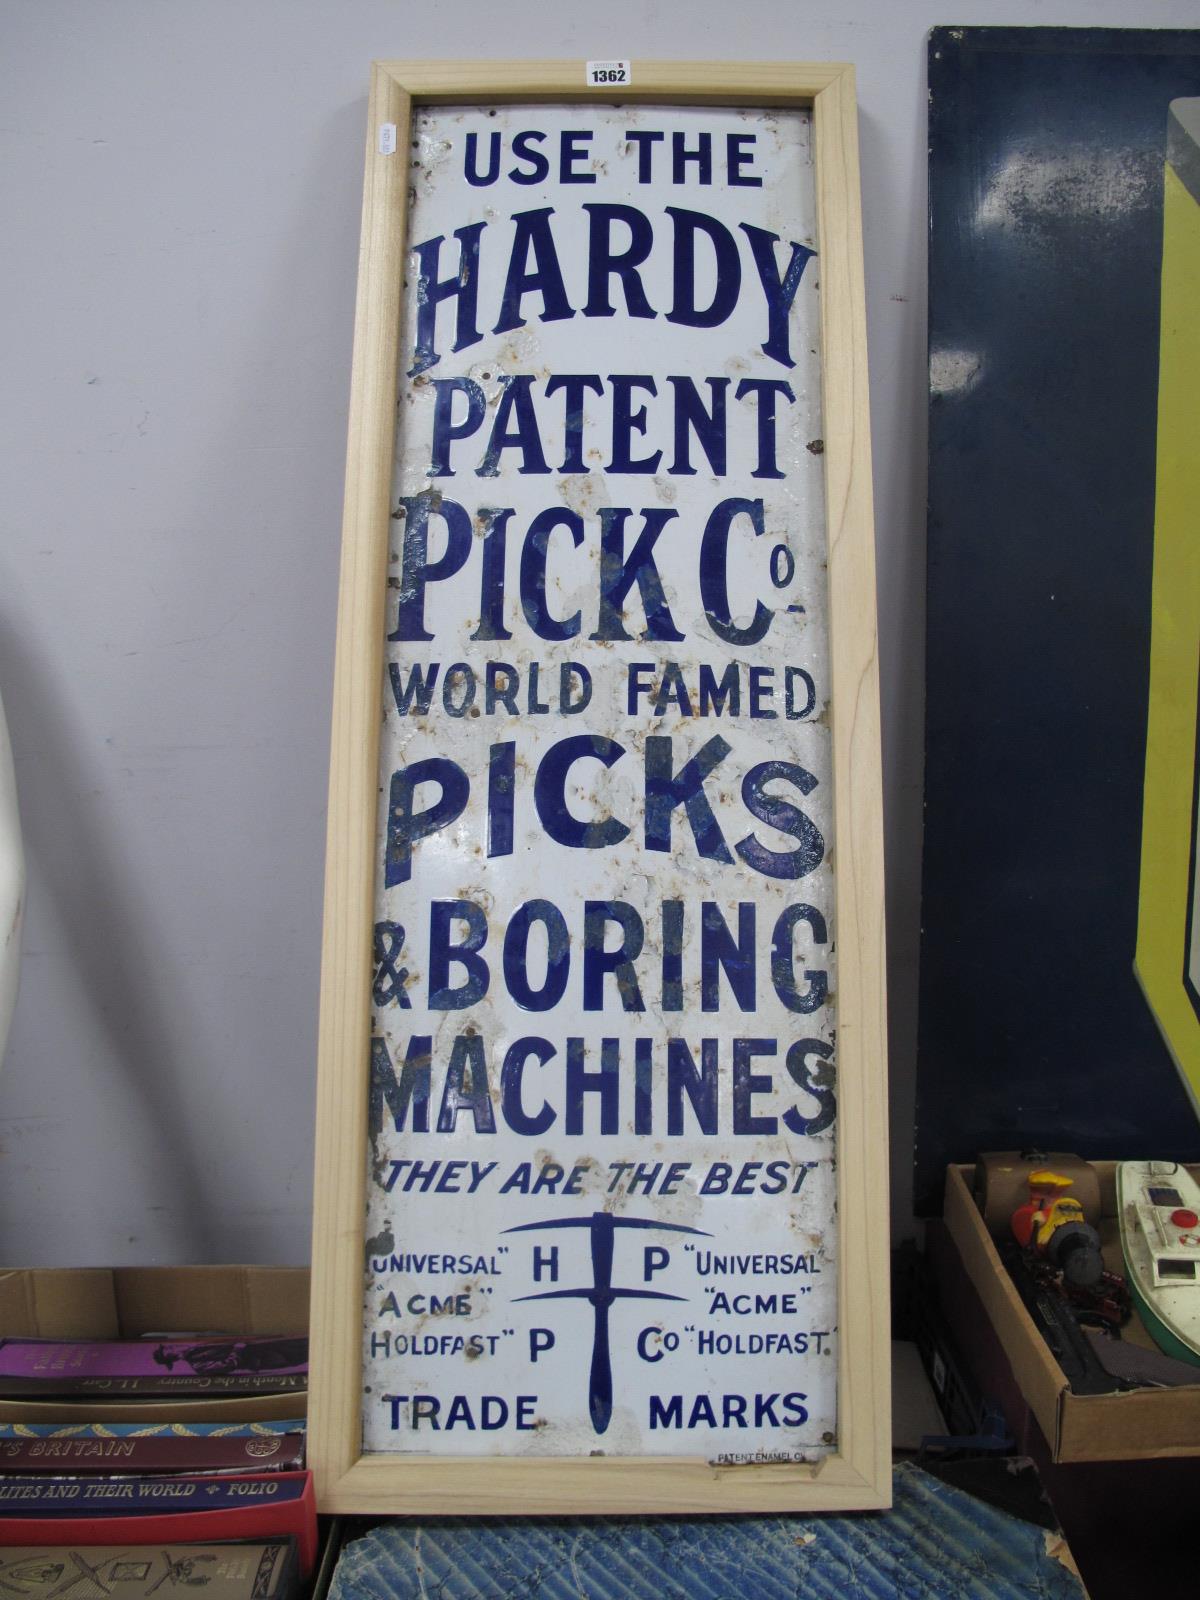 Vintage Advertising - Enamel sign 'Use The Hardy Patent Pick Co',World framed picks and boring,